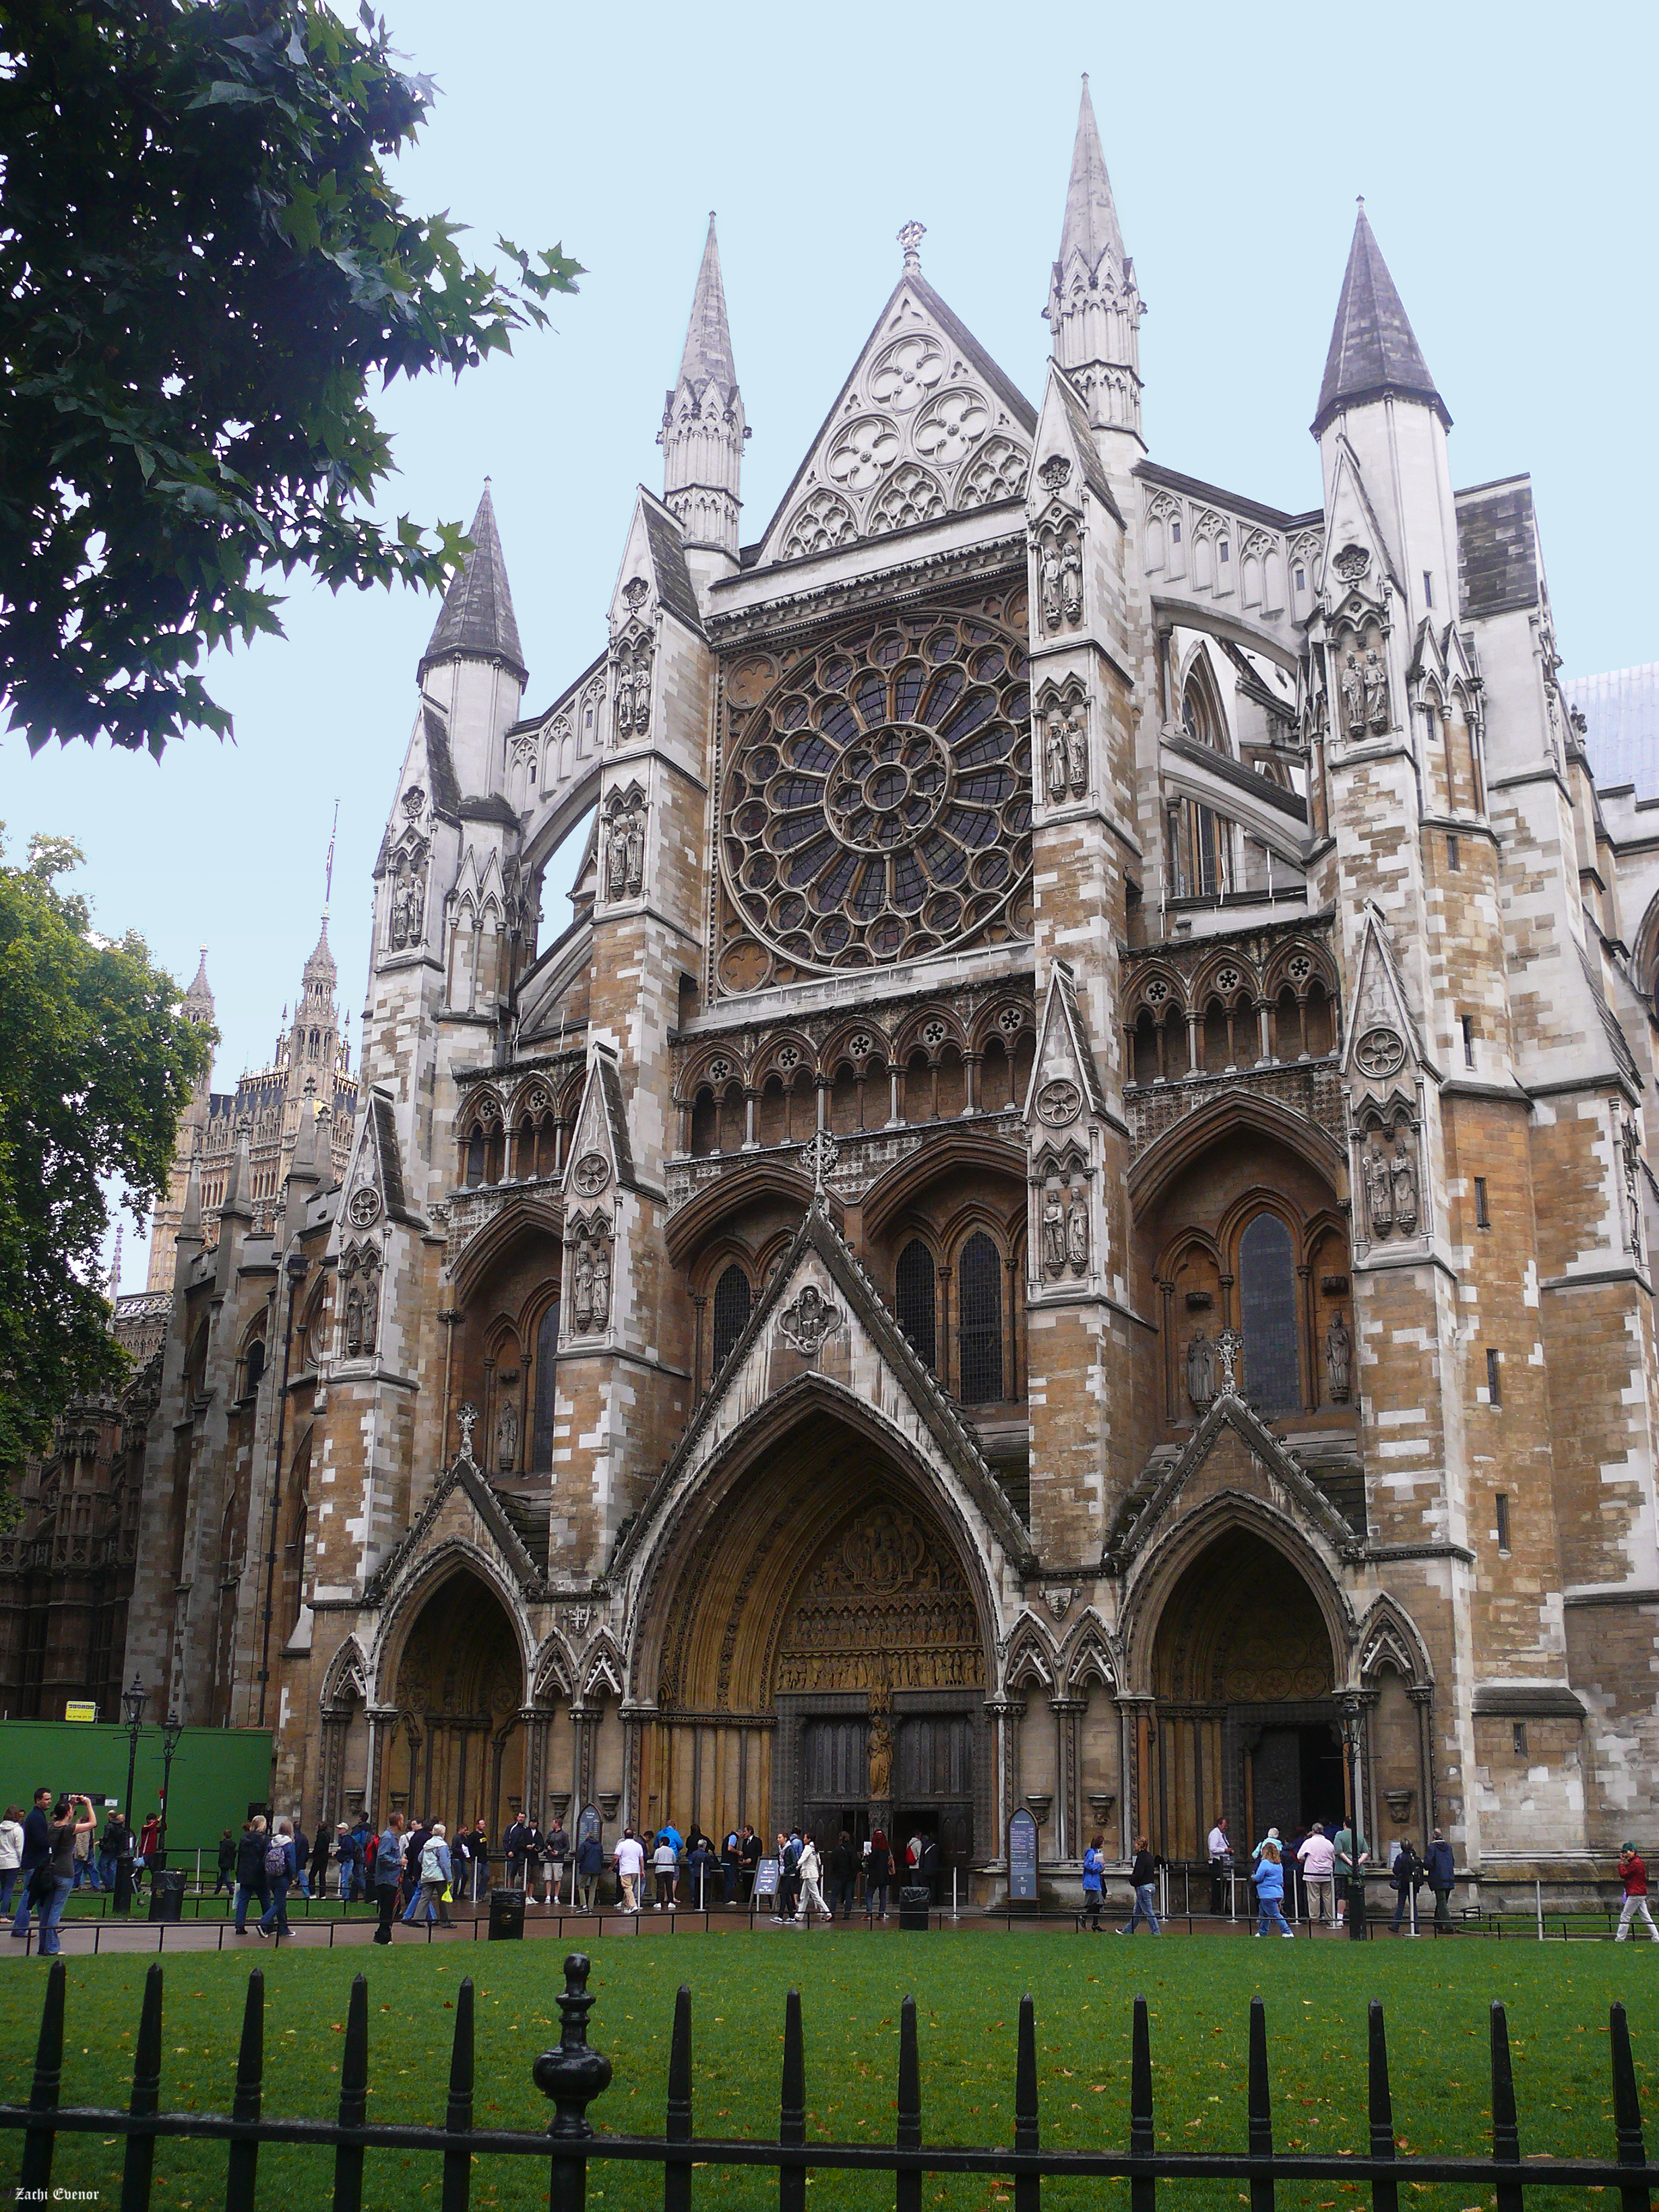 File:WestminsterAbbey-north-facade001m.jpg - Wikimedia Commons